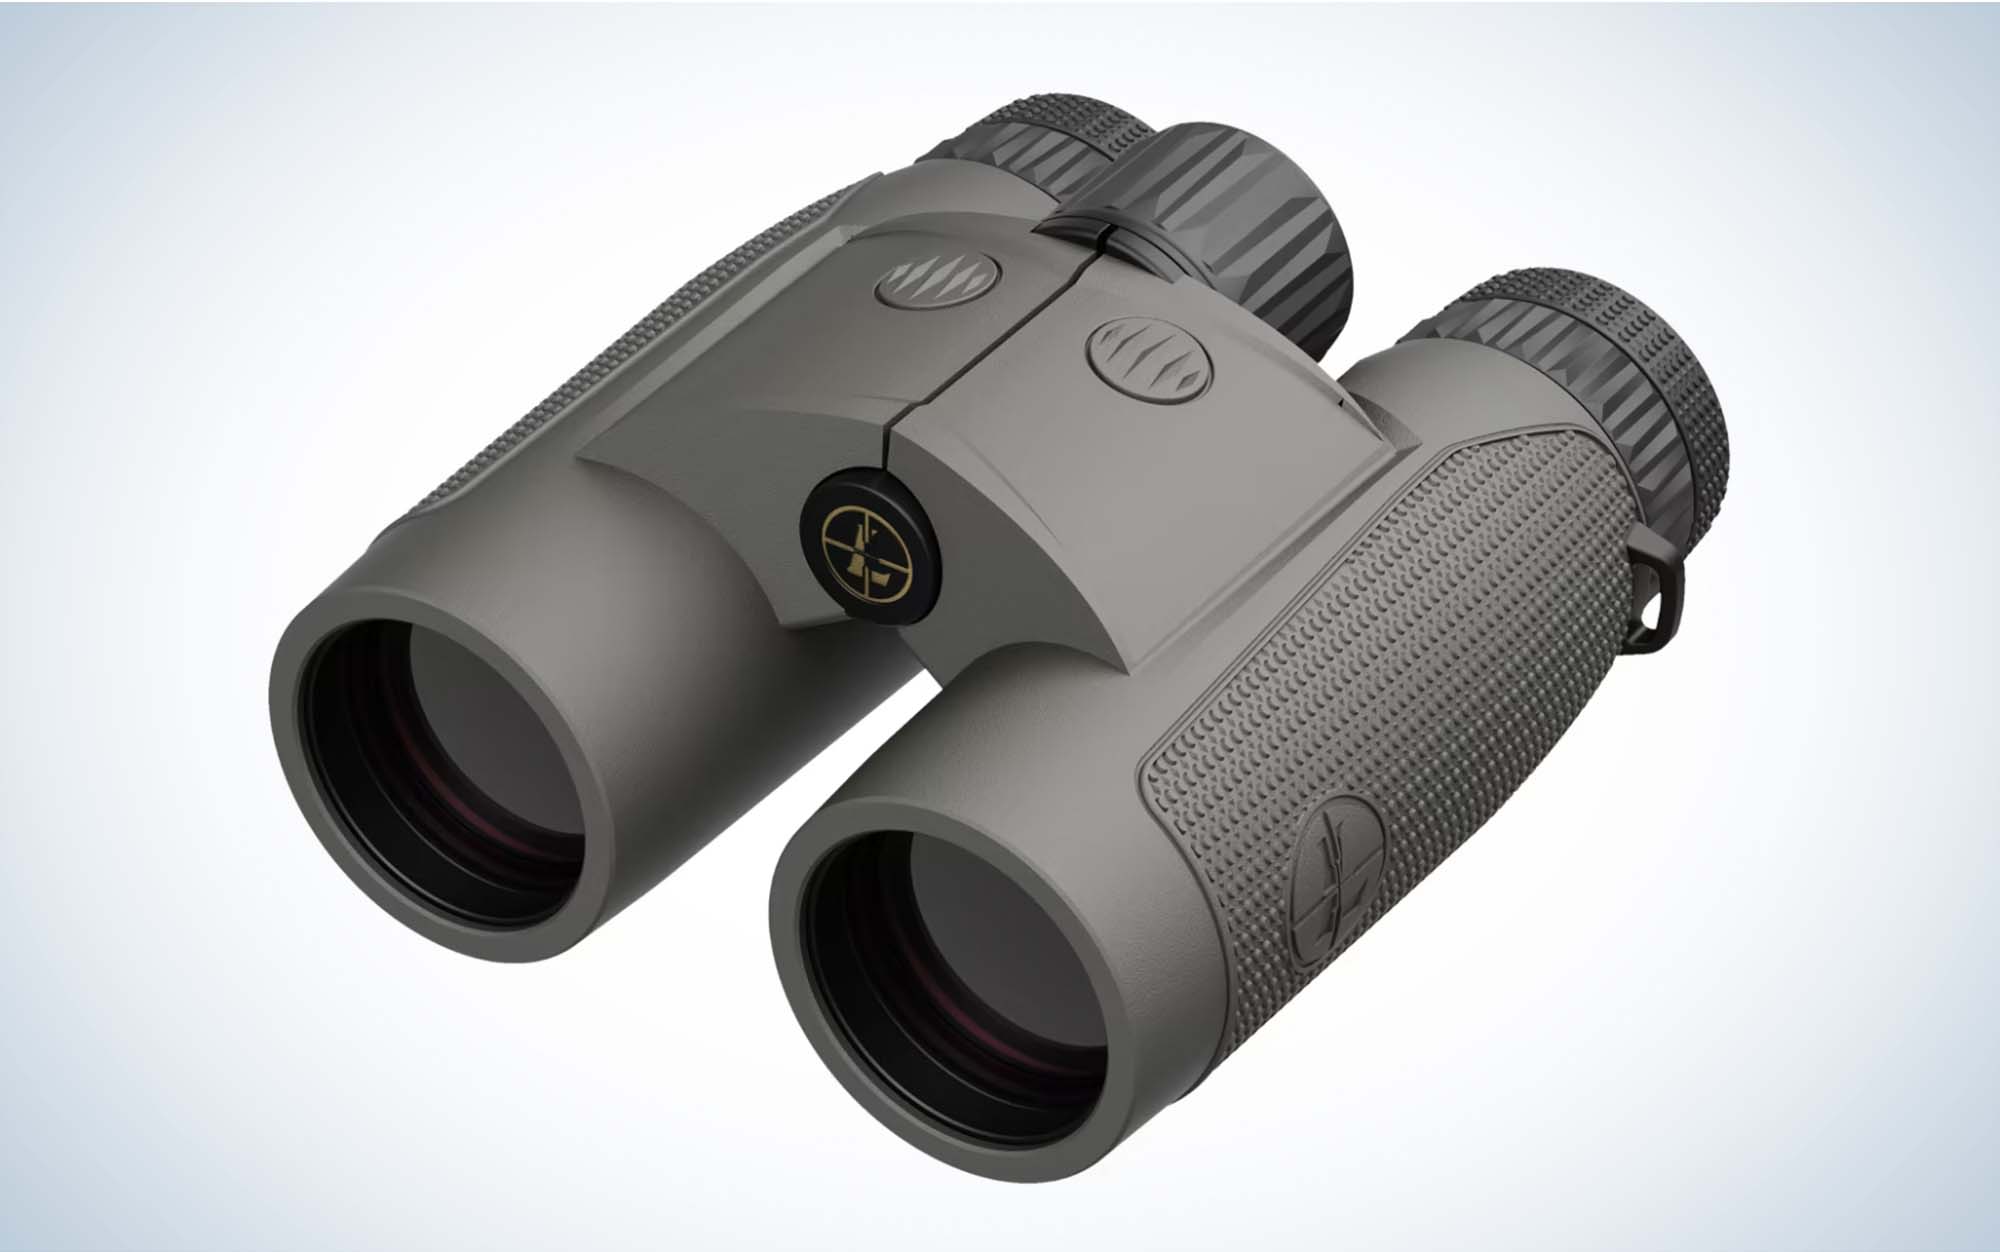 The Leupold BX-4 Range are the best rangfinding binoculars for hunting.